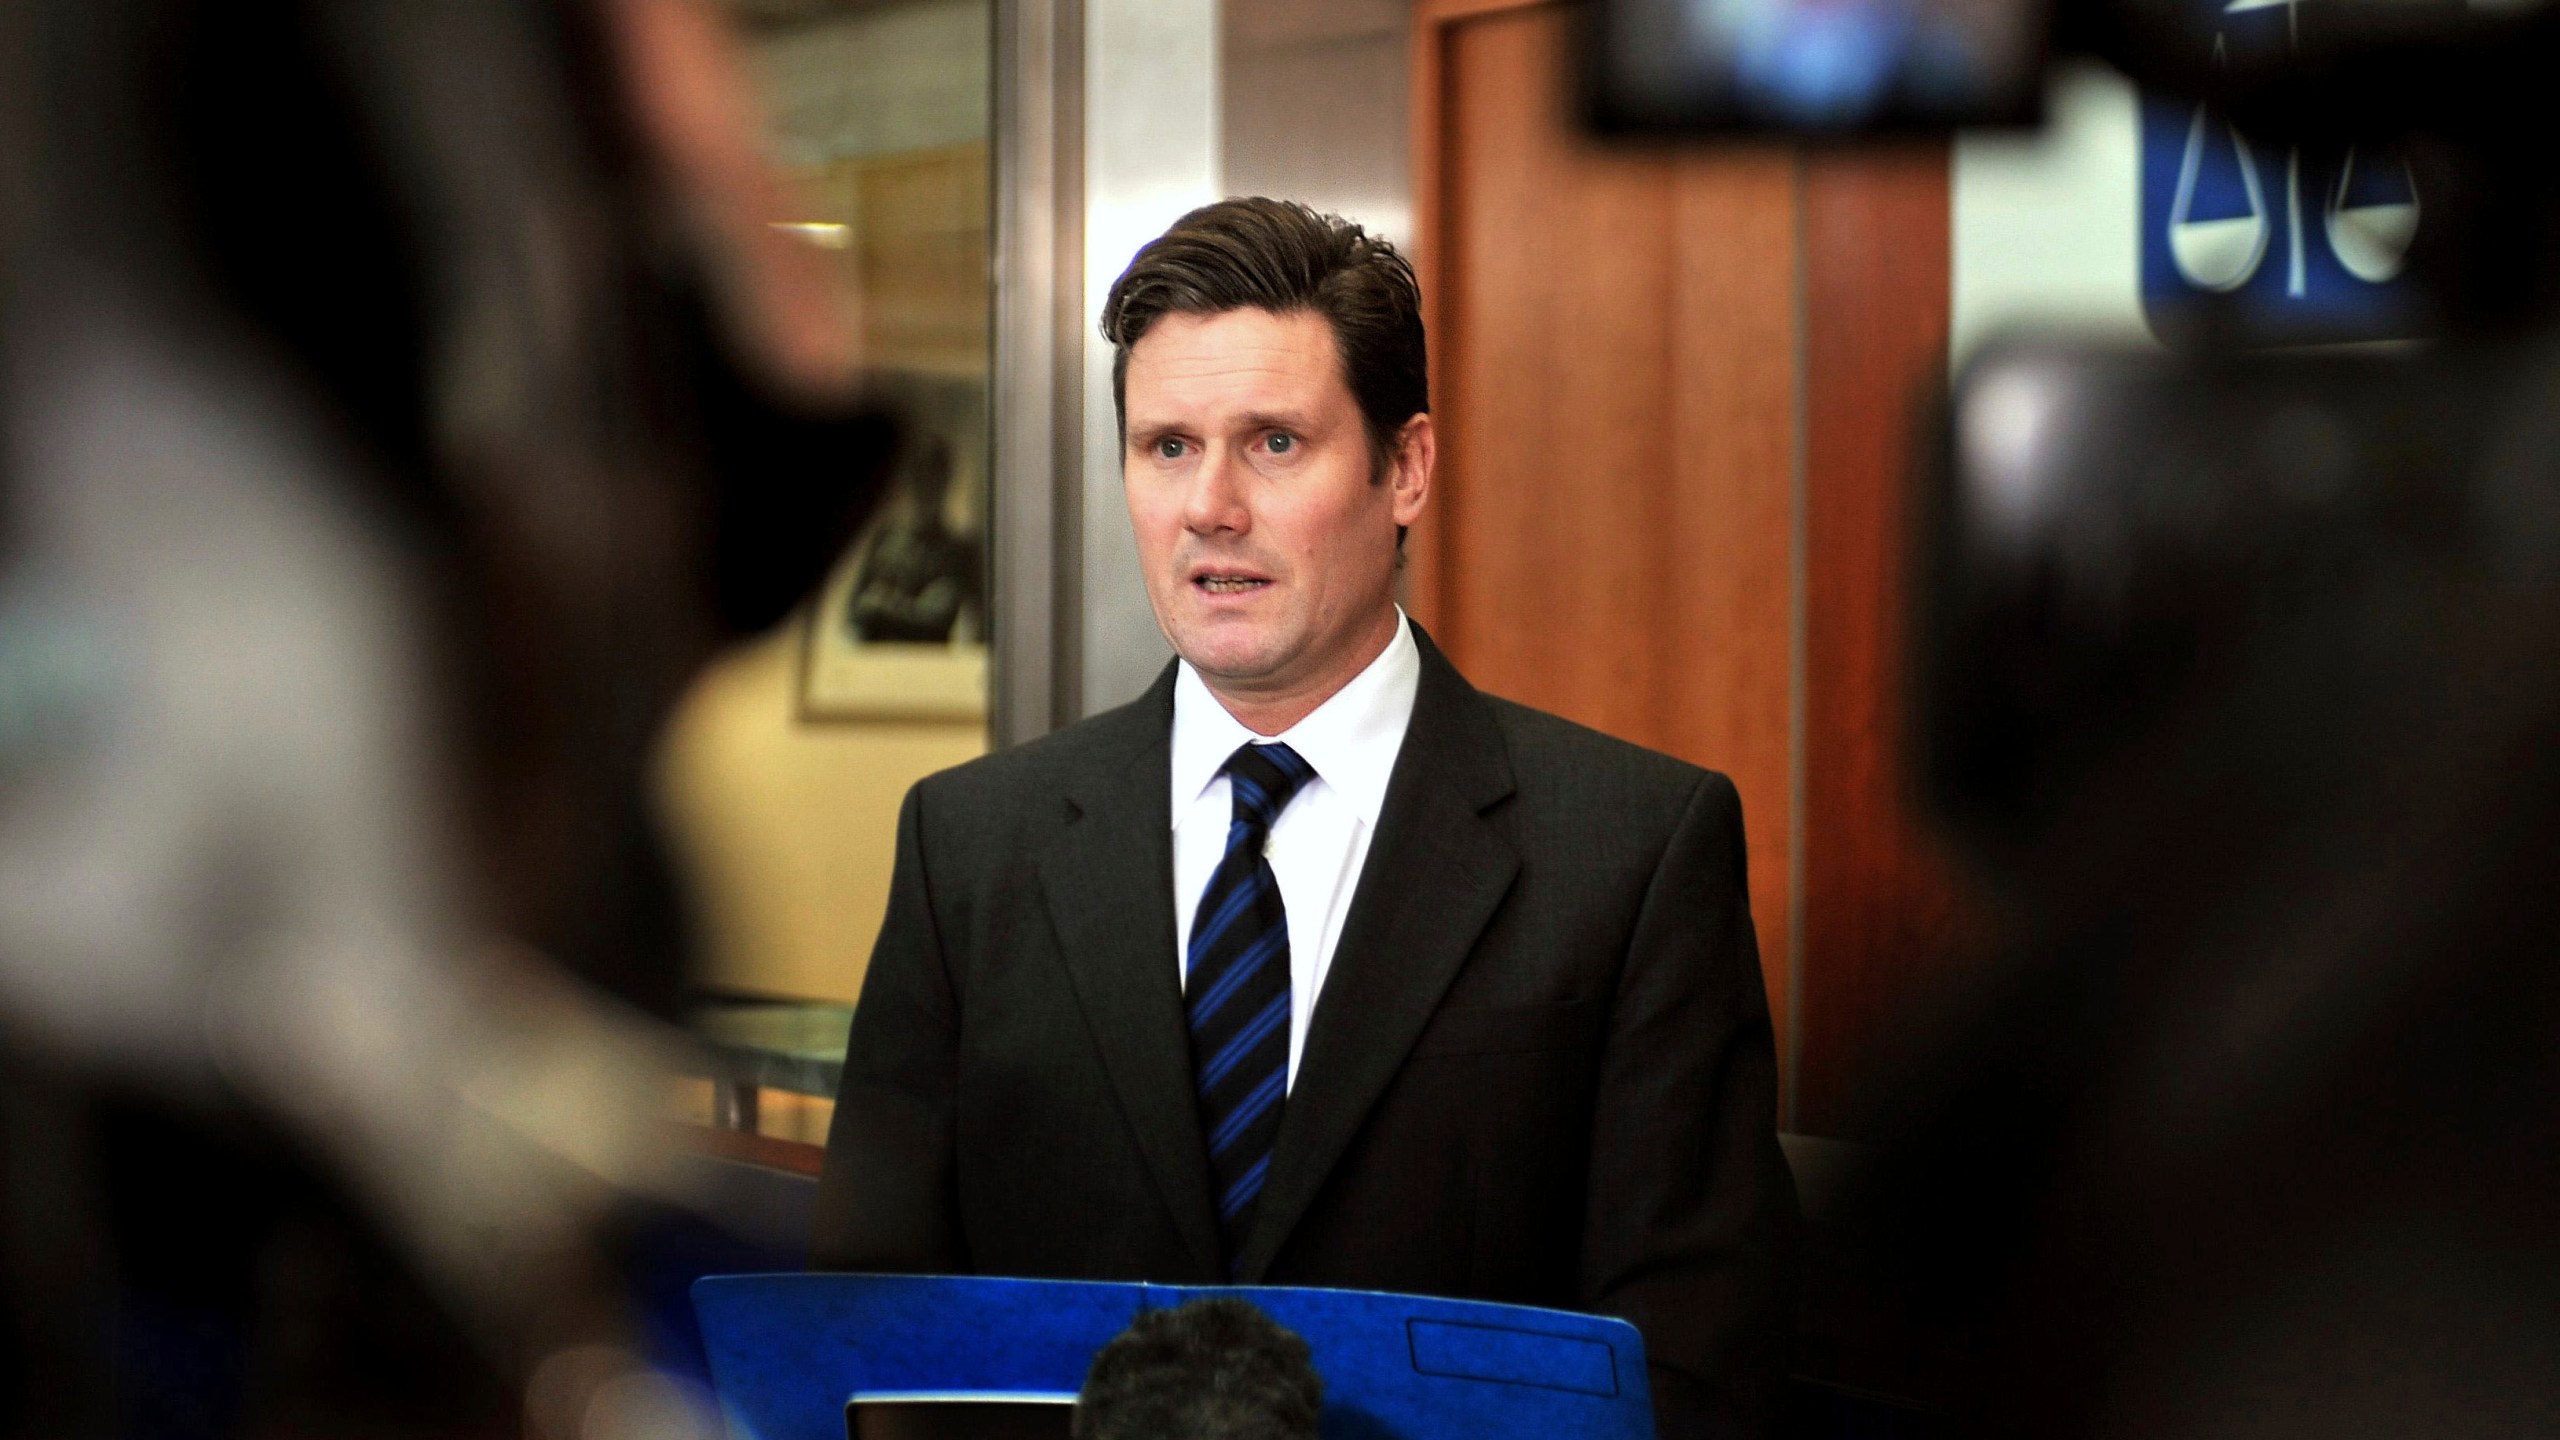 FILE - Keir Starmer, director of public prosecution, delivers a statement to the media on British lawmakers facing criminal charges relating to claims made on expenses, at the Crown Prosecution Service headquarters in central London, on Feb. 5, 2010. (John Stillwell/Pool Photo via AP, File)